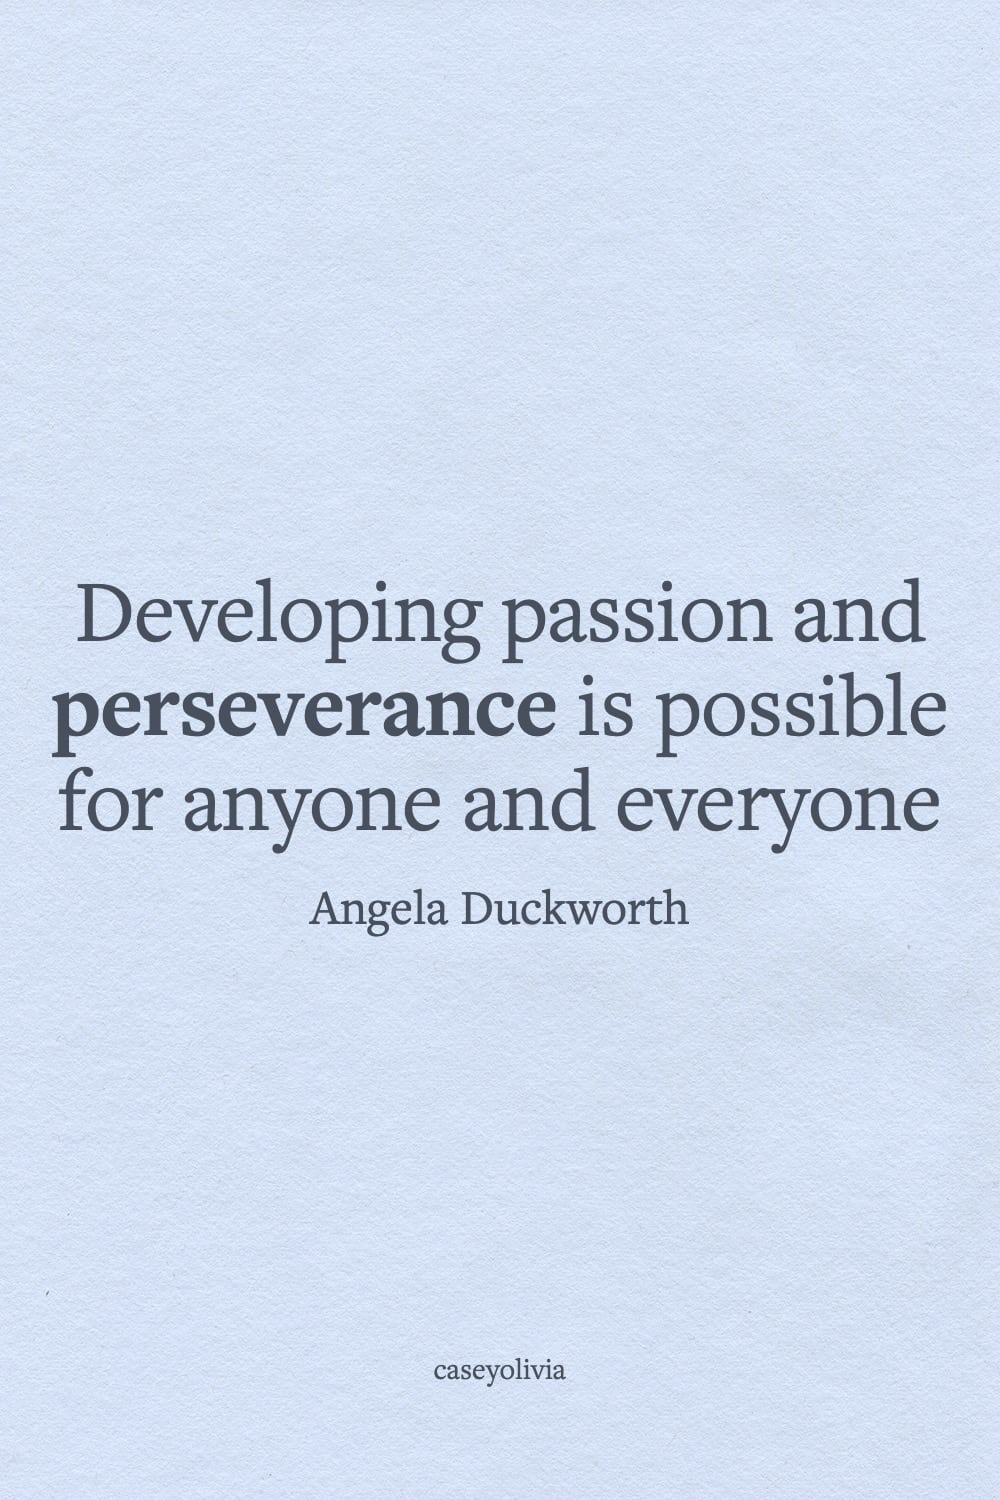 passion and perseverance is possible quotation